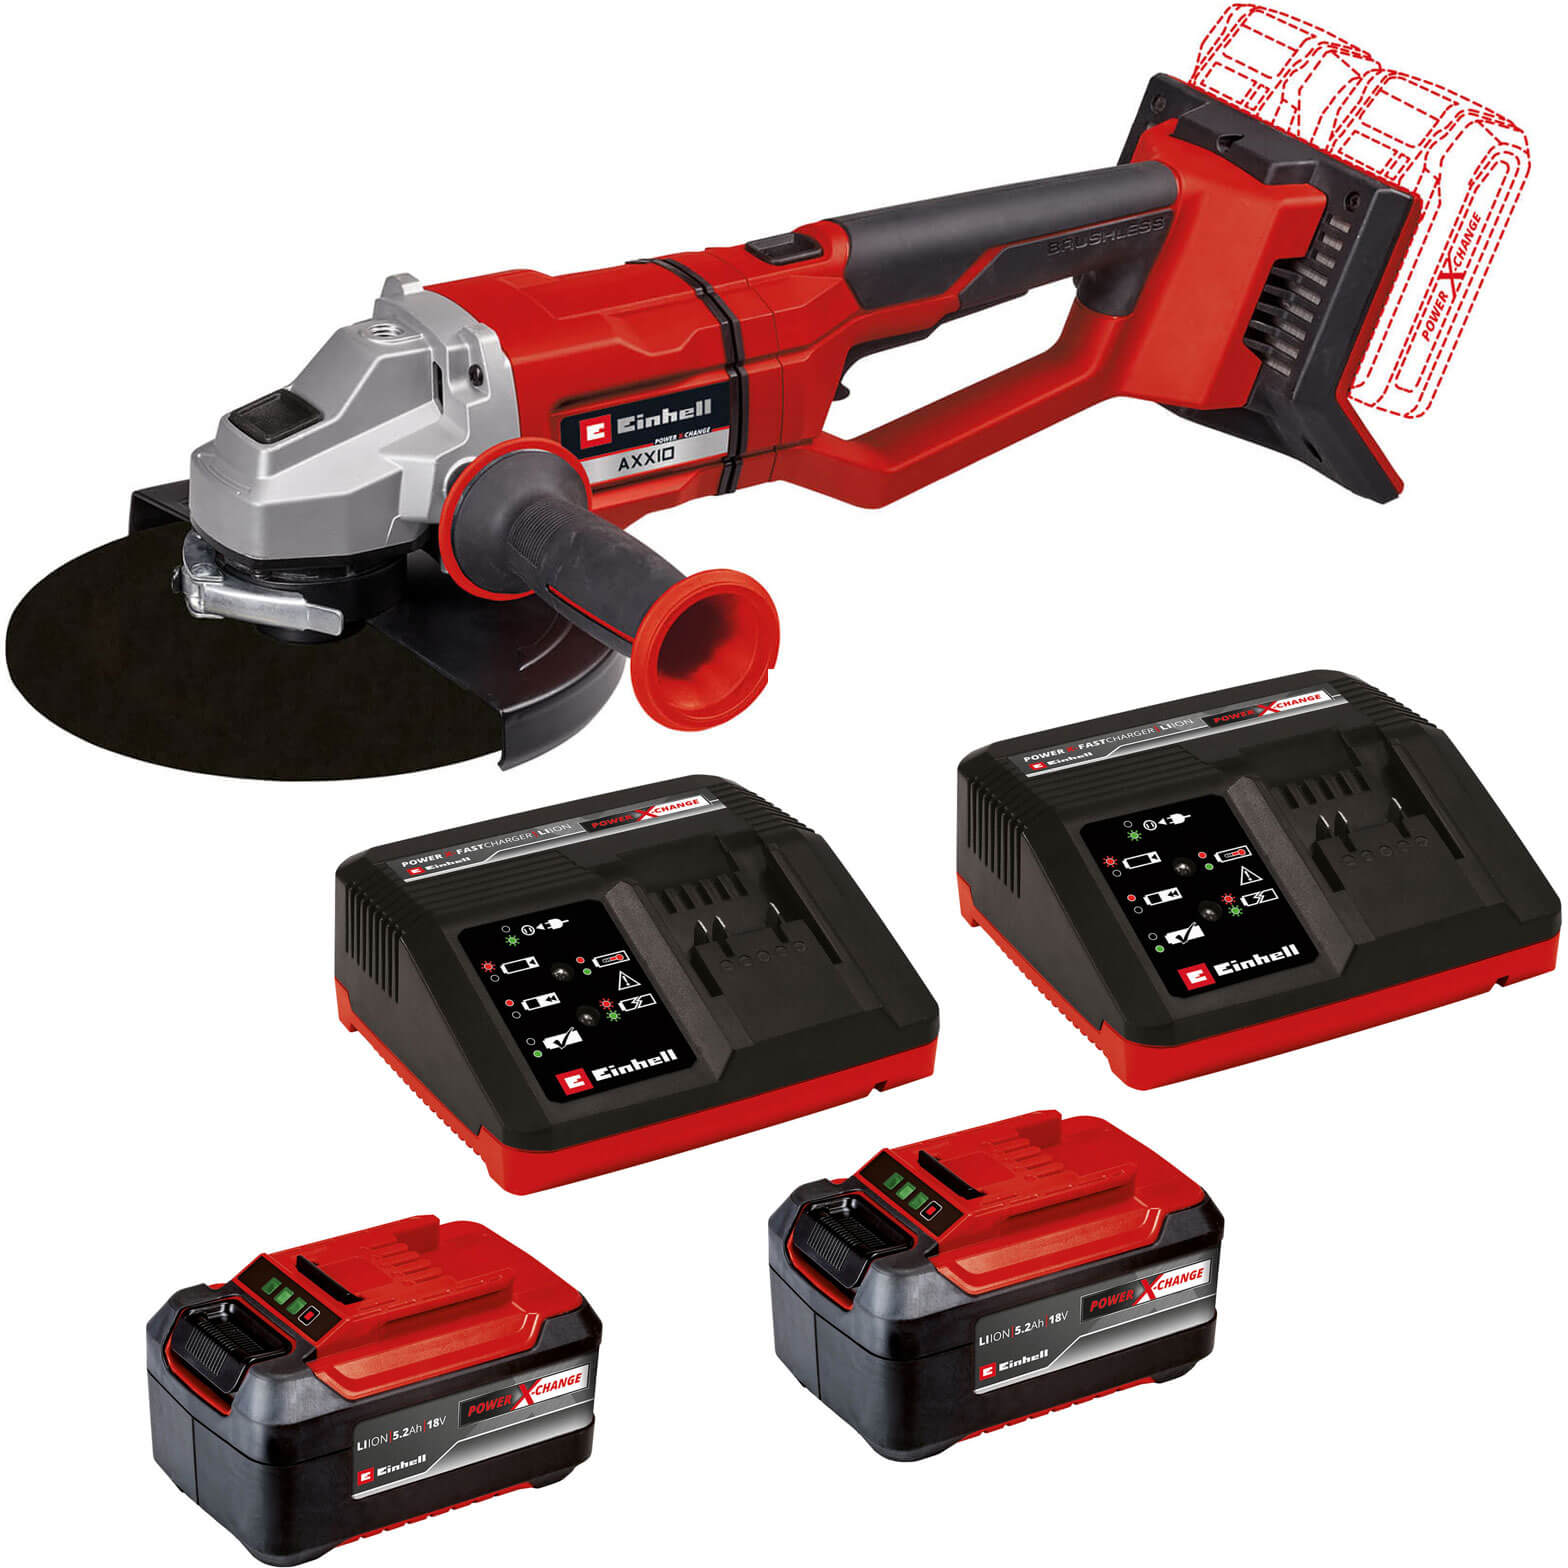 Image of Einhell AXXIO 36/230 Q 36v Cordless Brushless Angle Grinder 230mm 2 x 5.2ah Li-ion Charger No Case